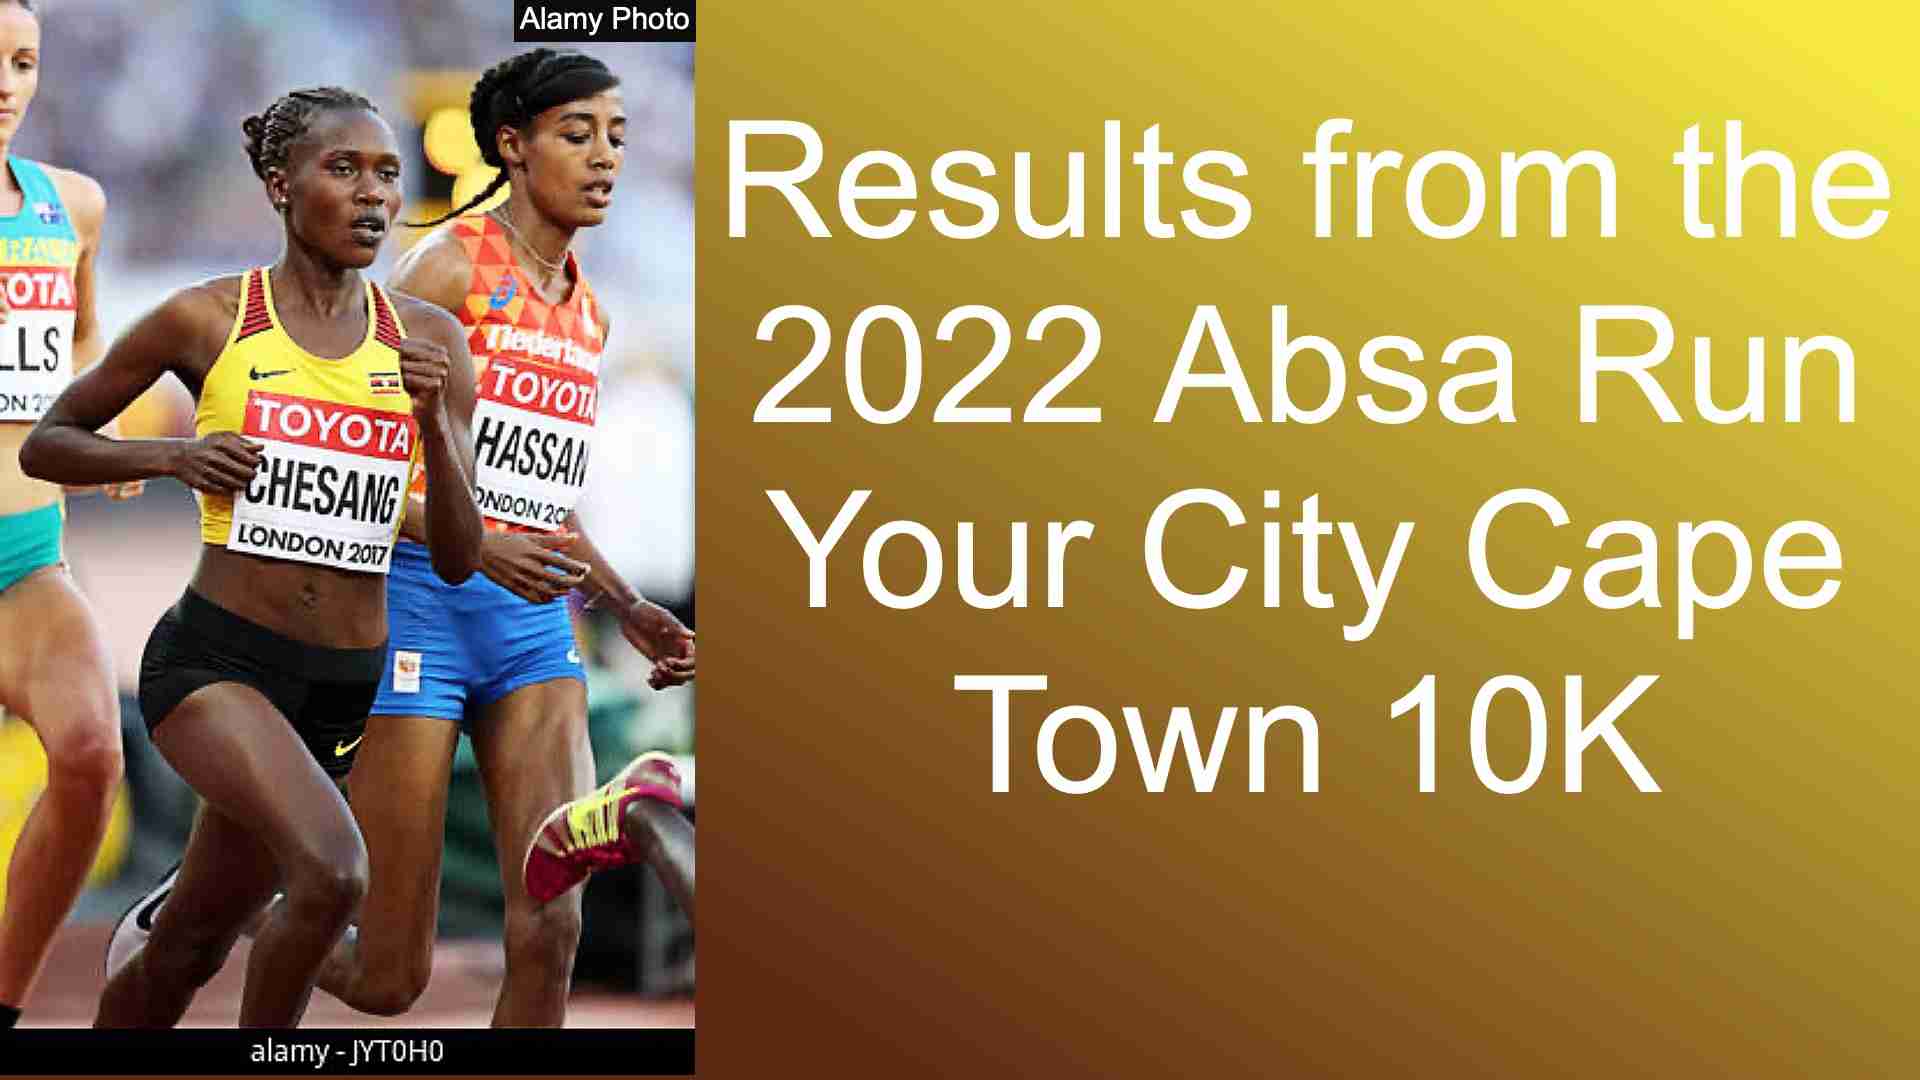 Results-from-the-2022-Absa-Run-Your-City-Cape-Town-10K